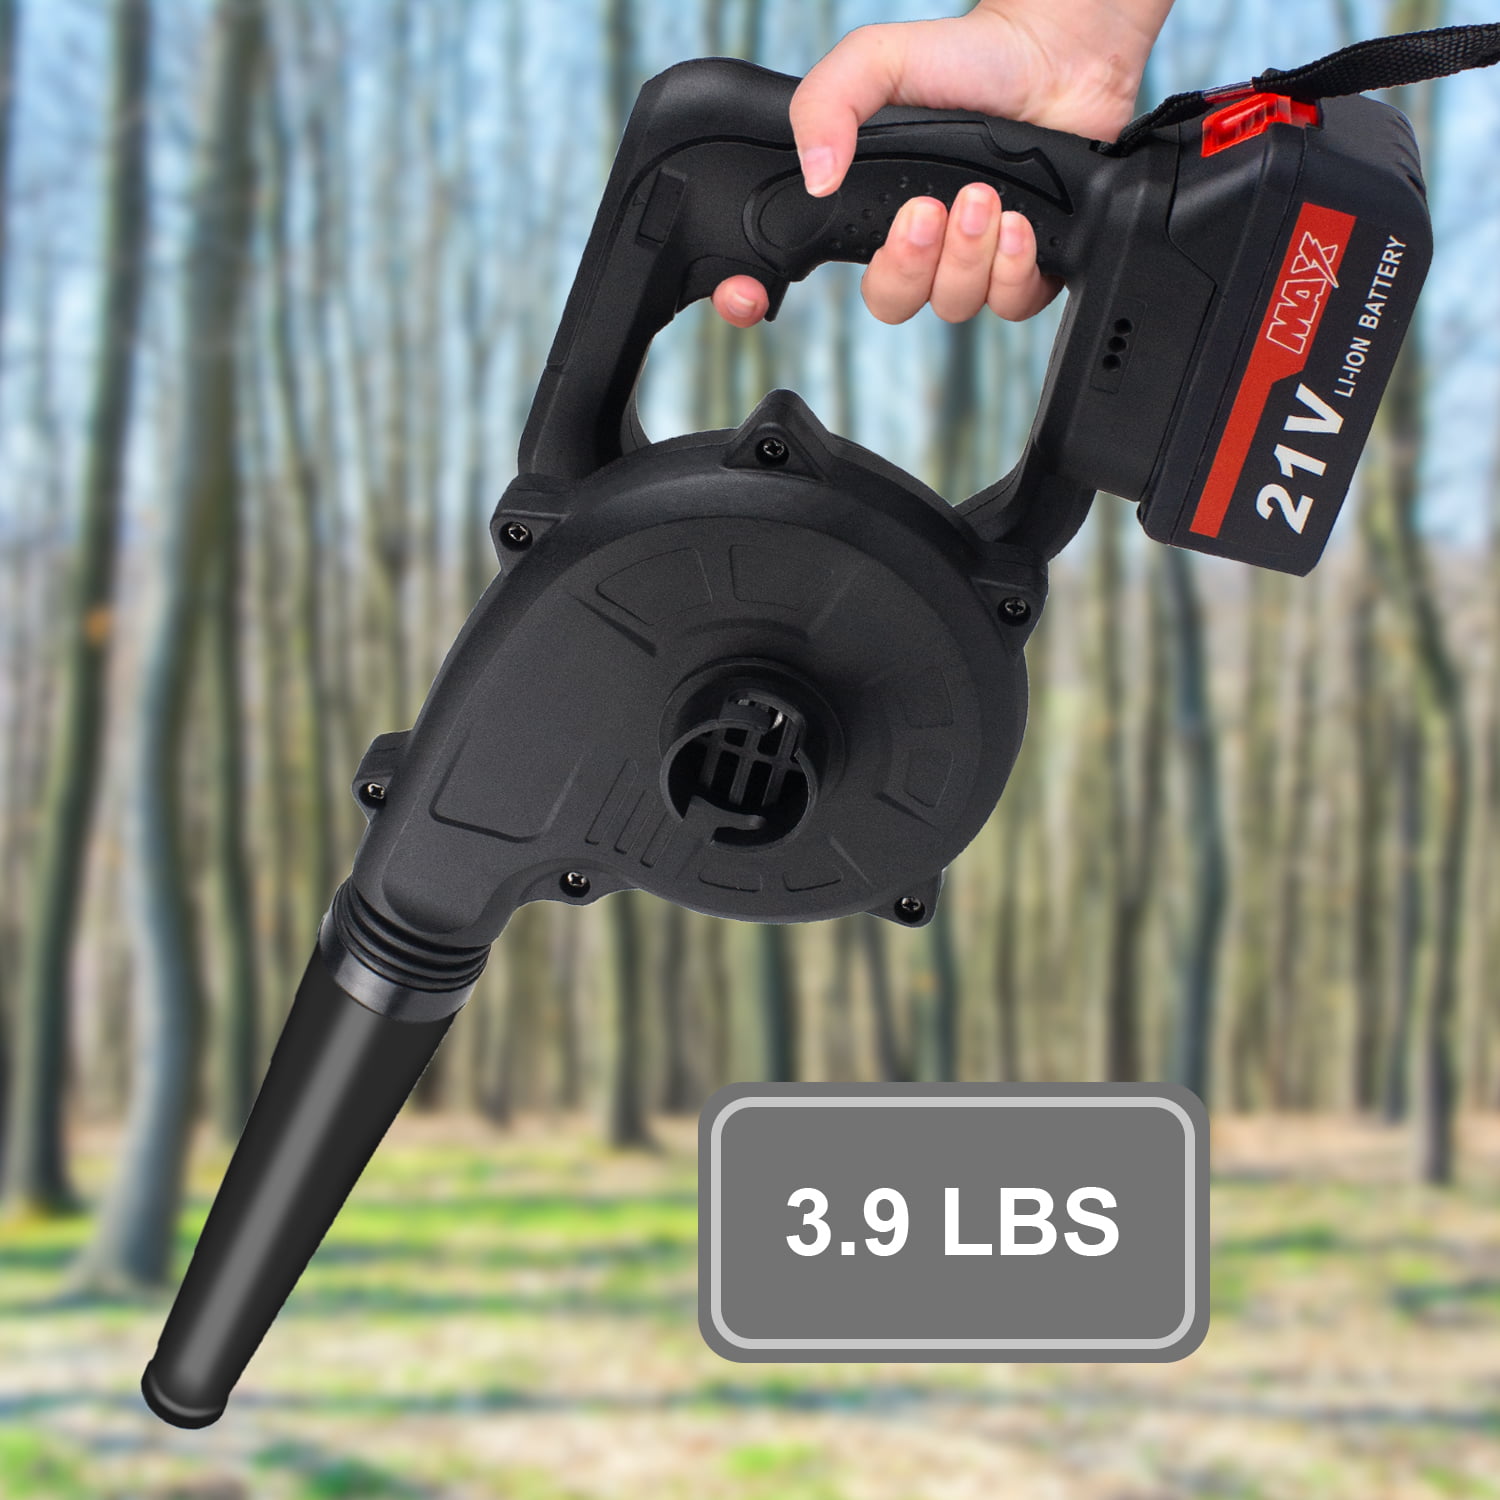 Tegatok Mini Leaf Blower, 2 in 1 Leaf Blower Cordless with Battery